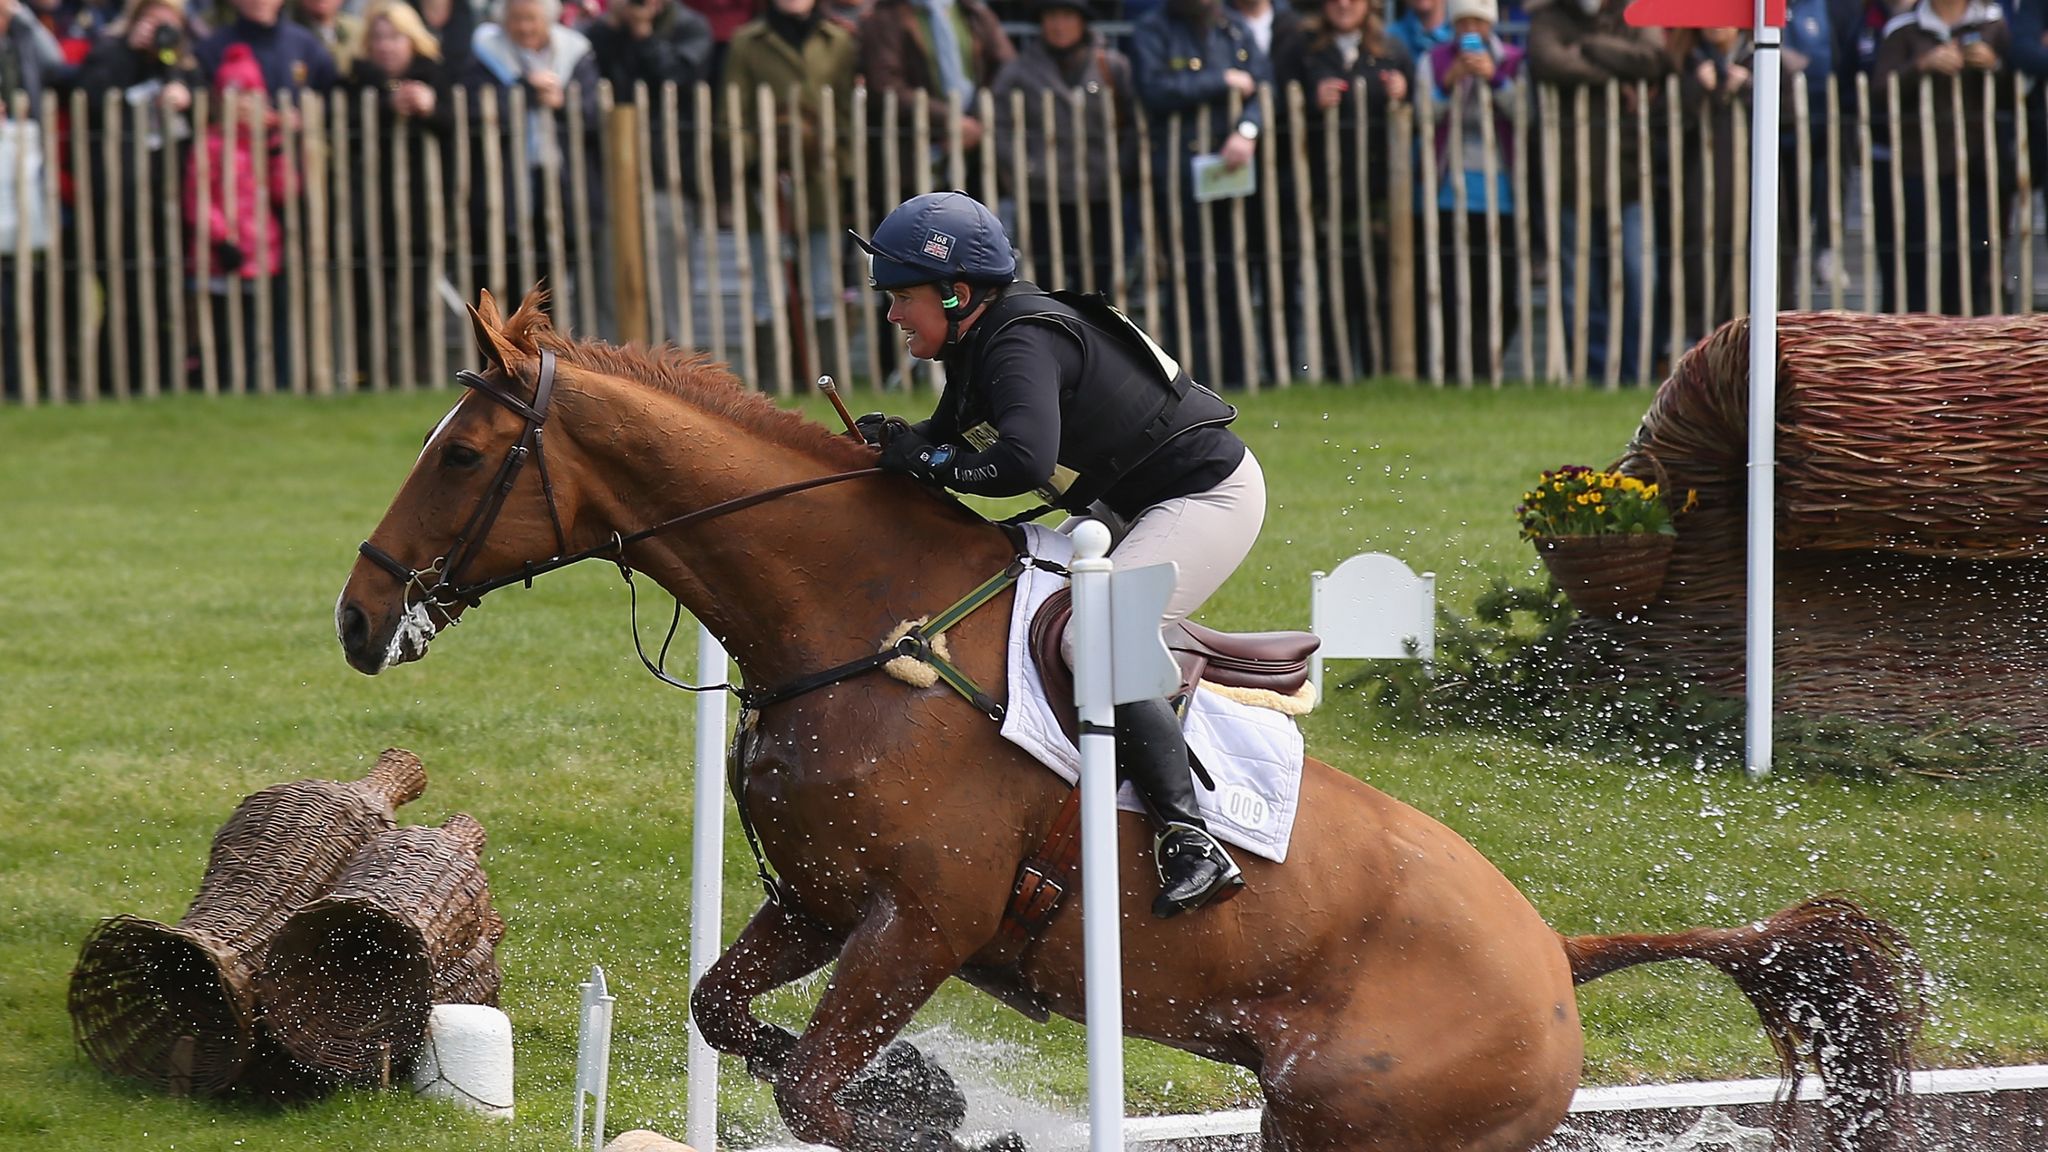 Pippa Funnell withdraws fom Badminton after cross-country fall Equestrian News Sky Sports